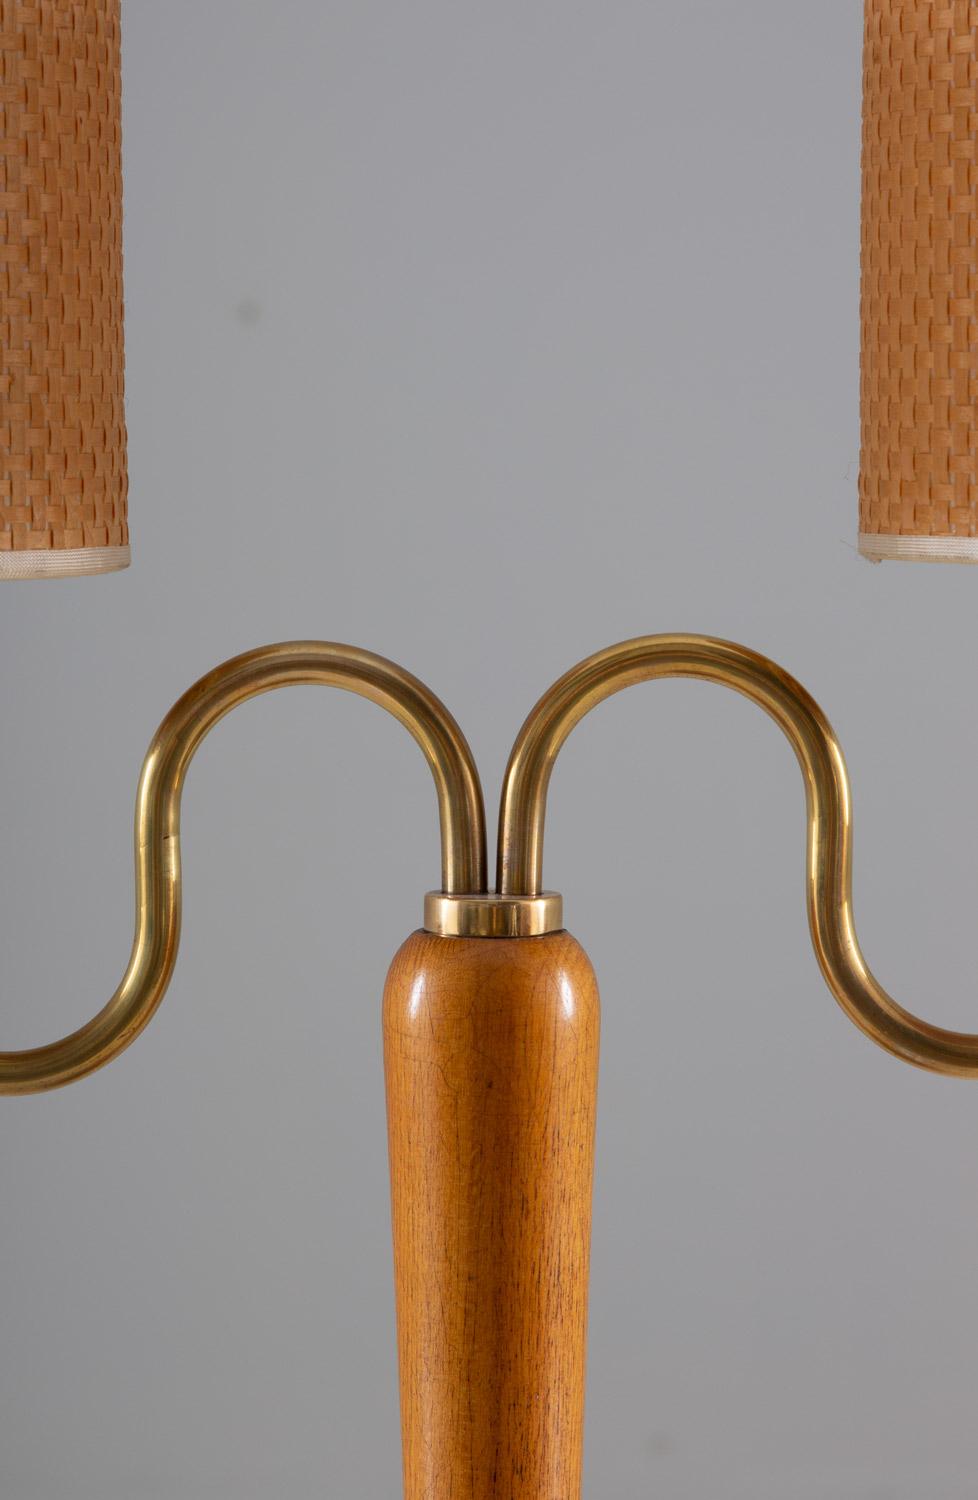 Table lamp in model 3014 by Swedish manufacturer IWO AB.
This sculptural table lamp consist of a wooden base with brass arms, holding one shade each. The beautiful rattan shades were manufactured by Ateljé Lyktan during the same era but are not the